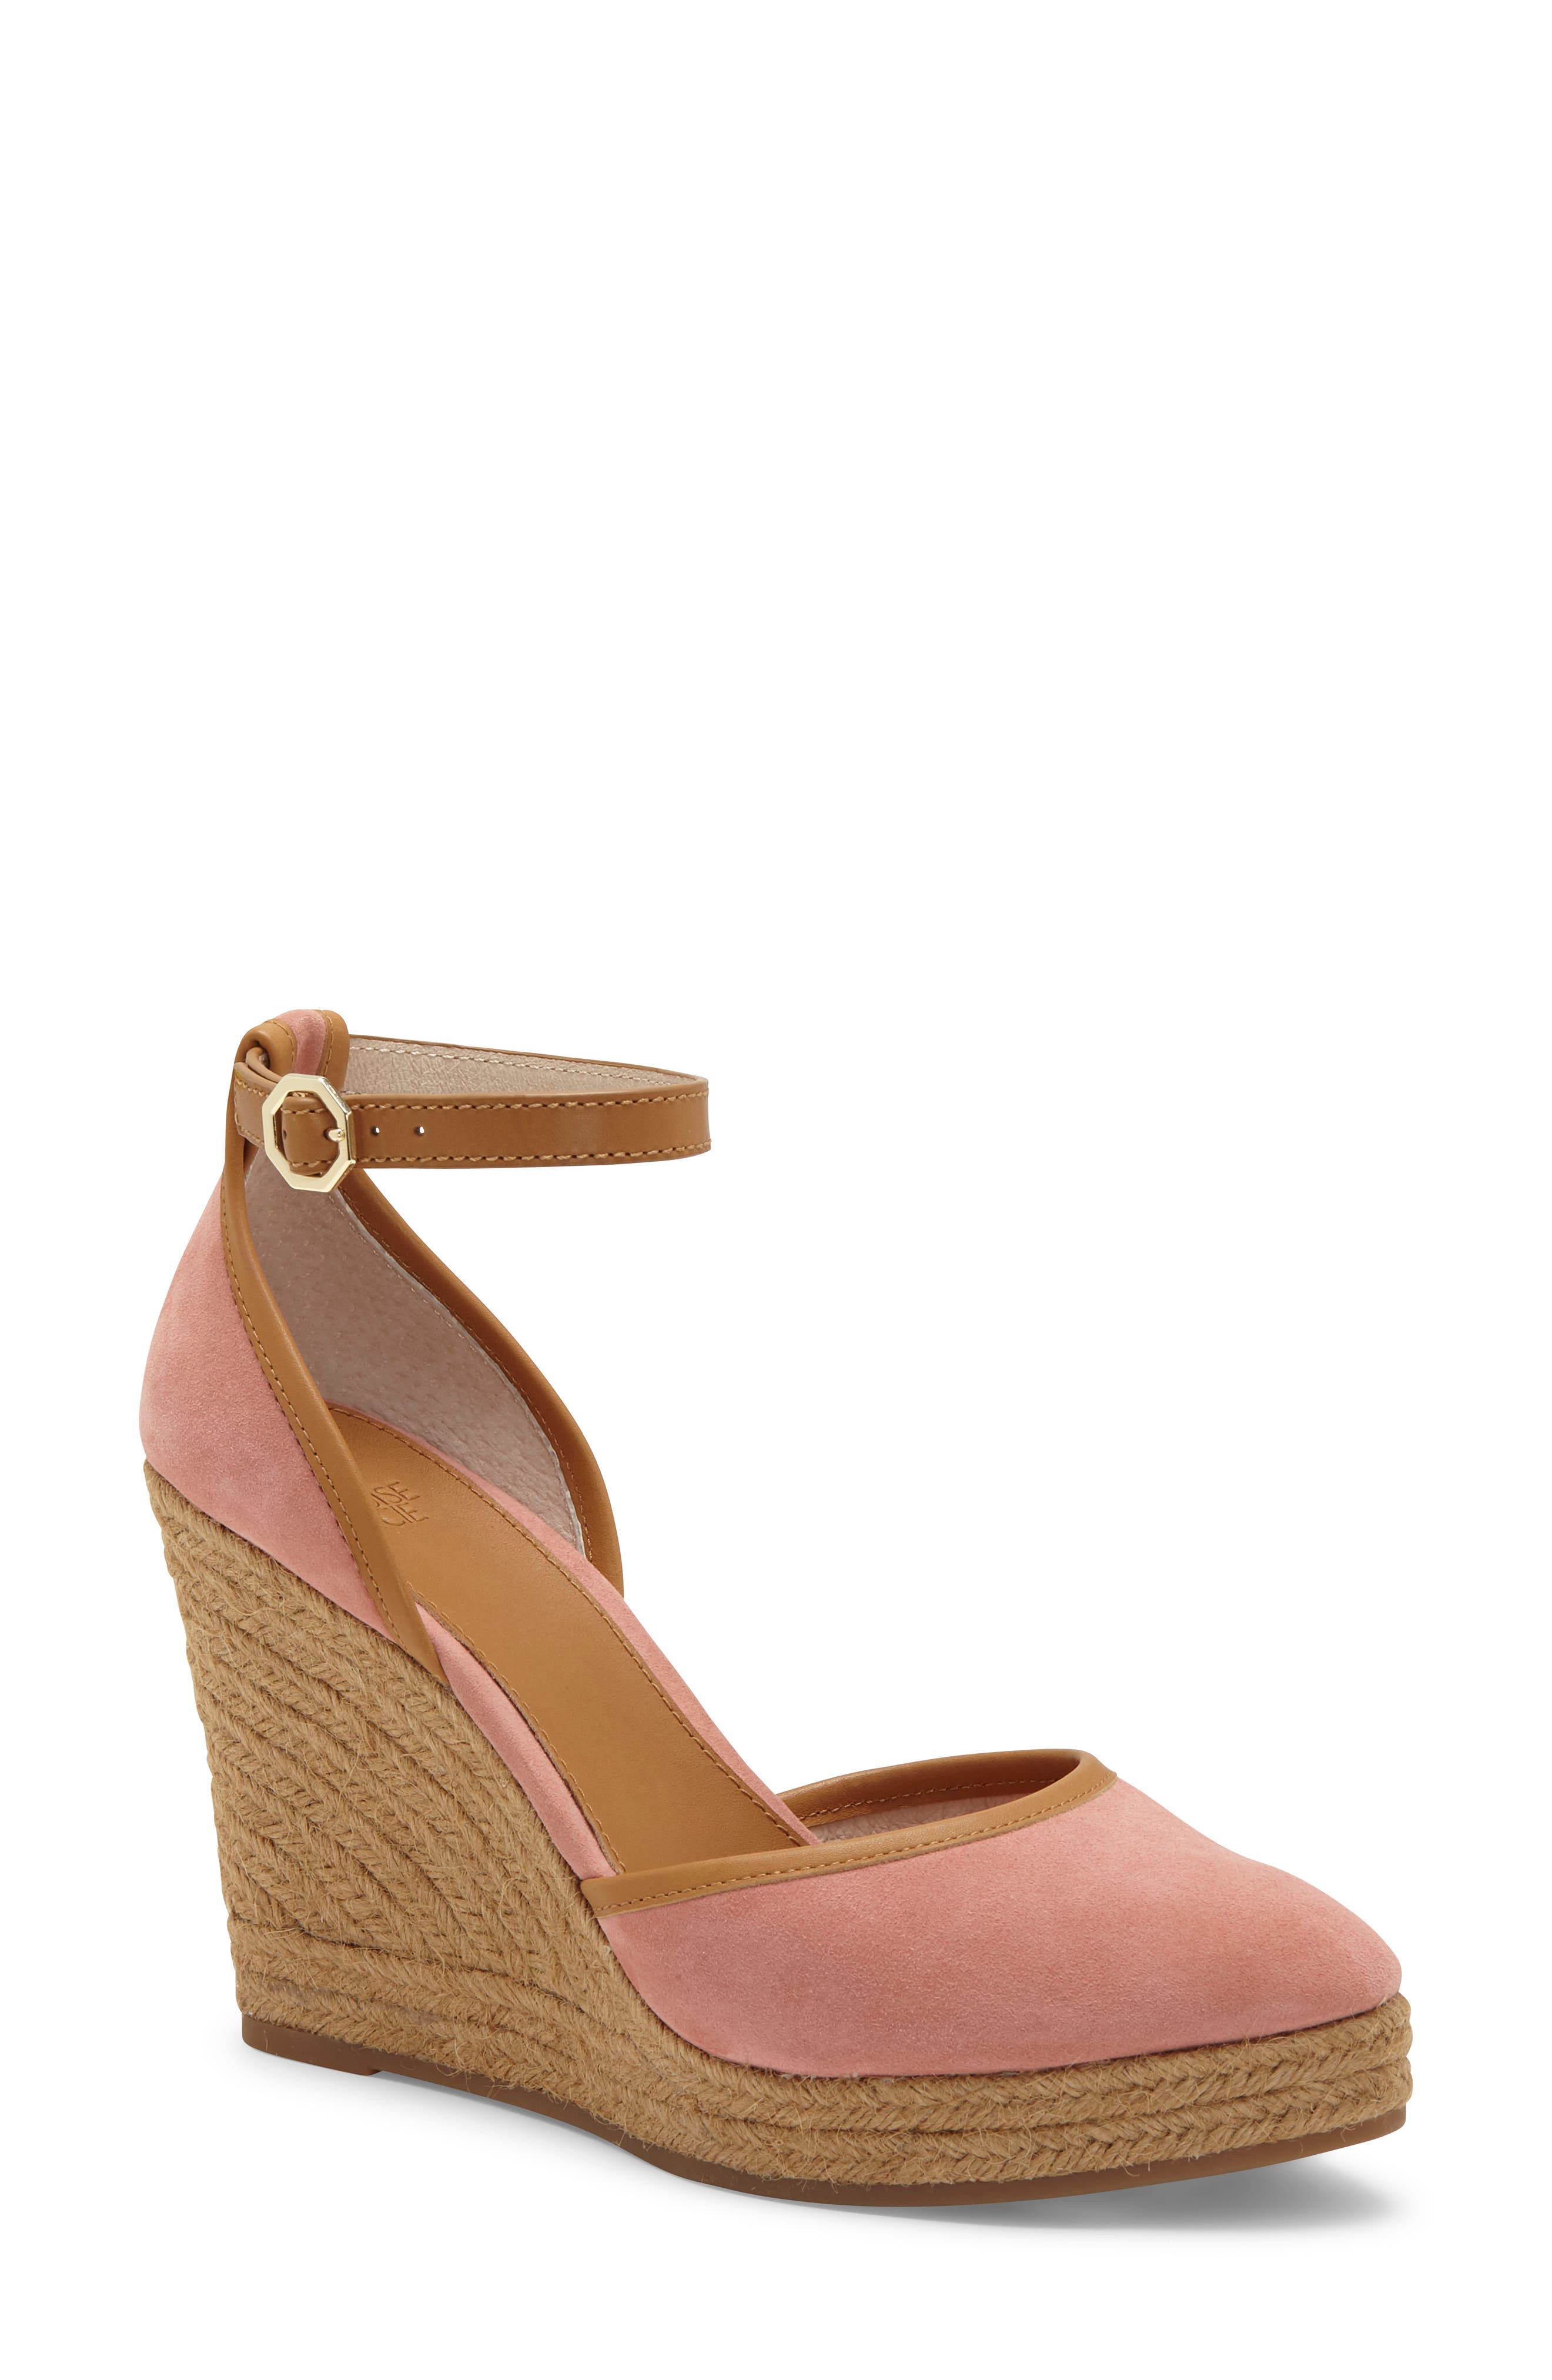 fall wedge shoes